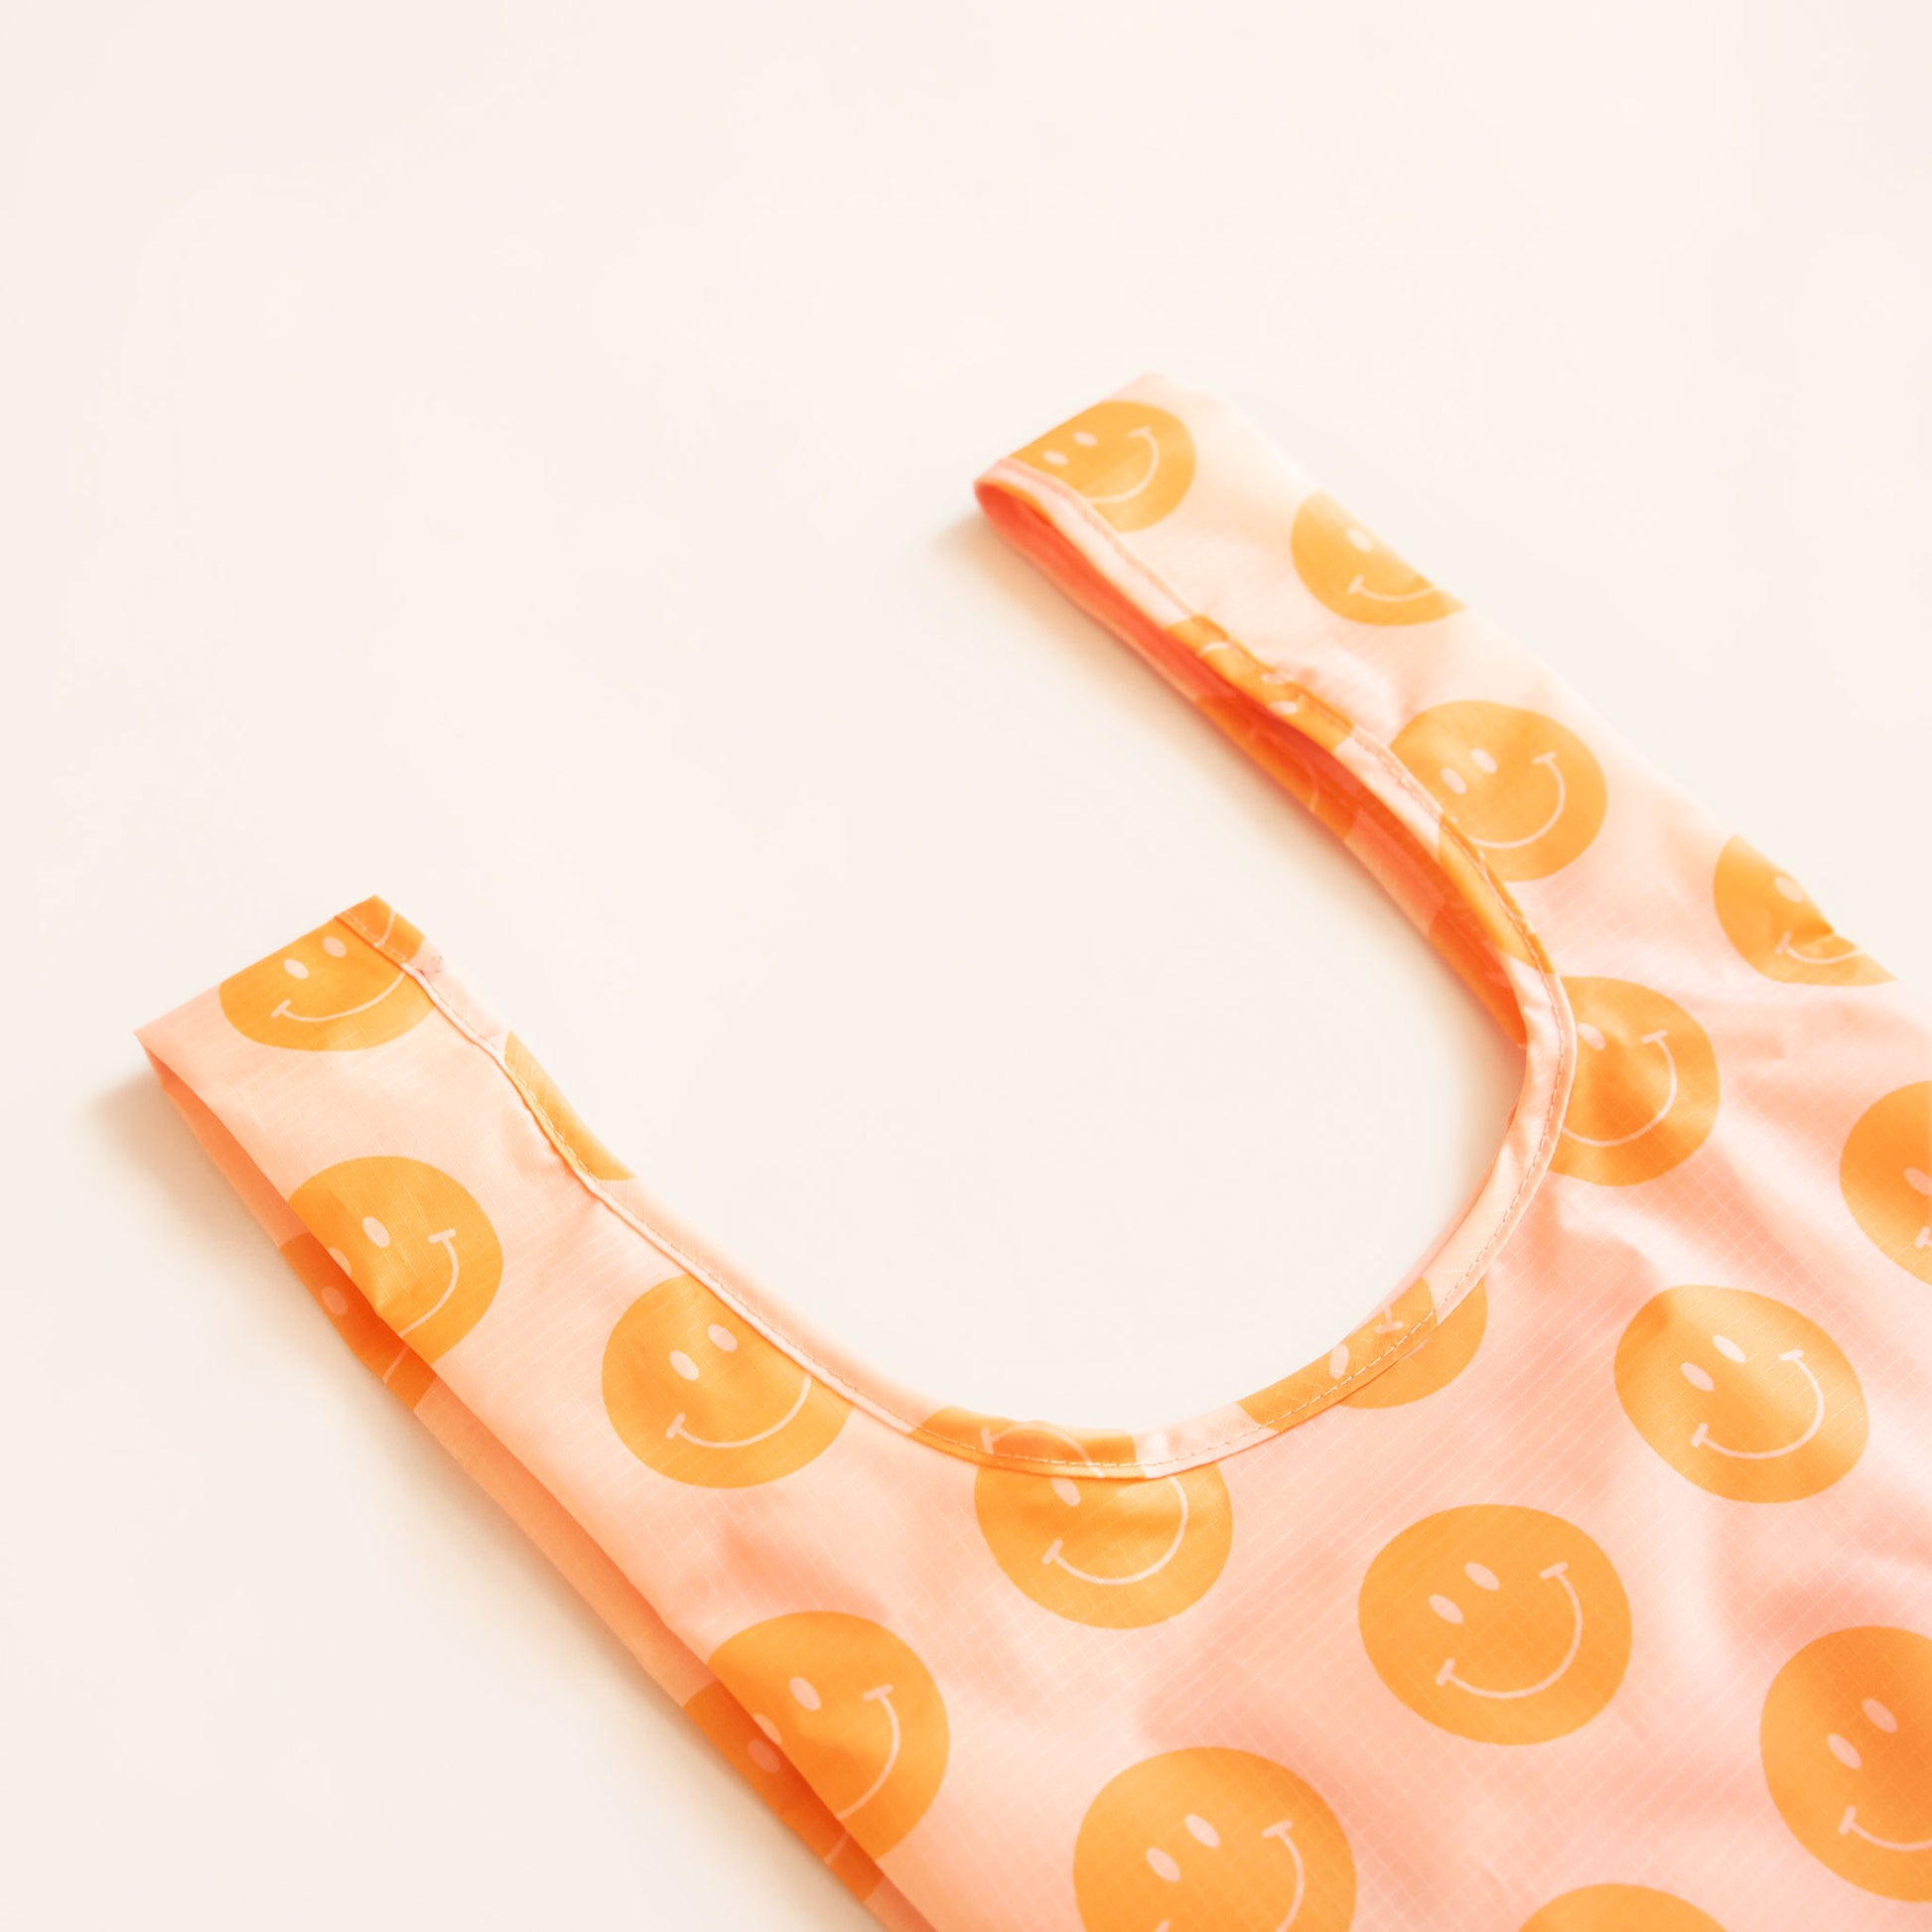 Zoomed view of peach nylon reusable bag. The bag is covered in a print of orange smiley faces. 